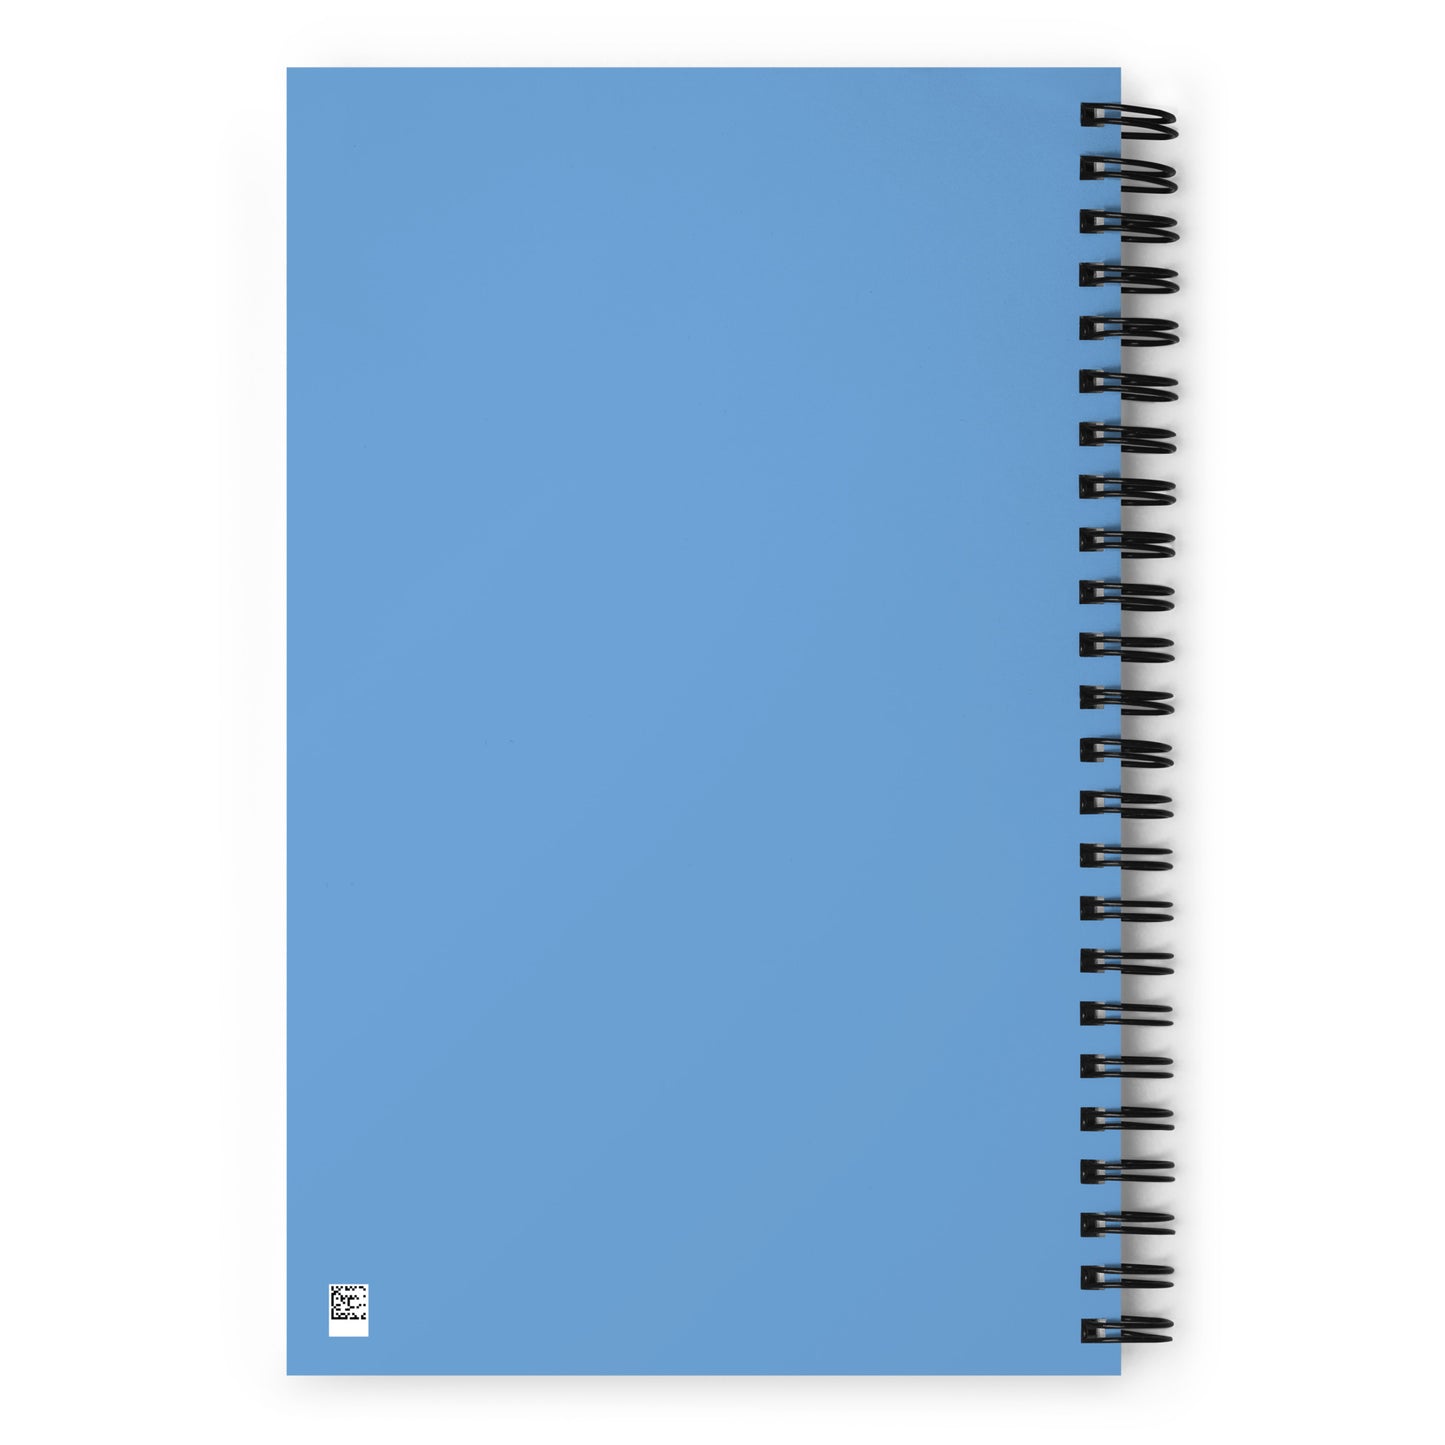 The back side of a blue wire-bound notebook